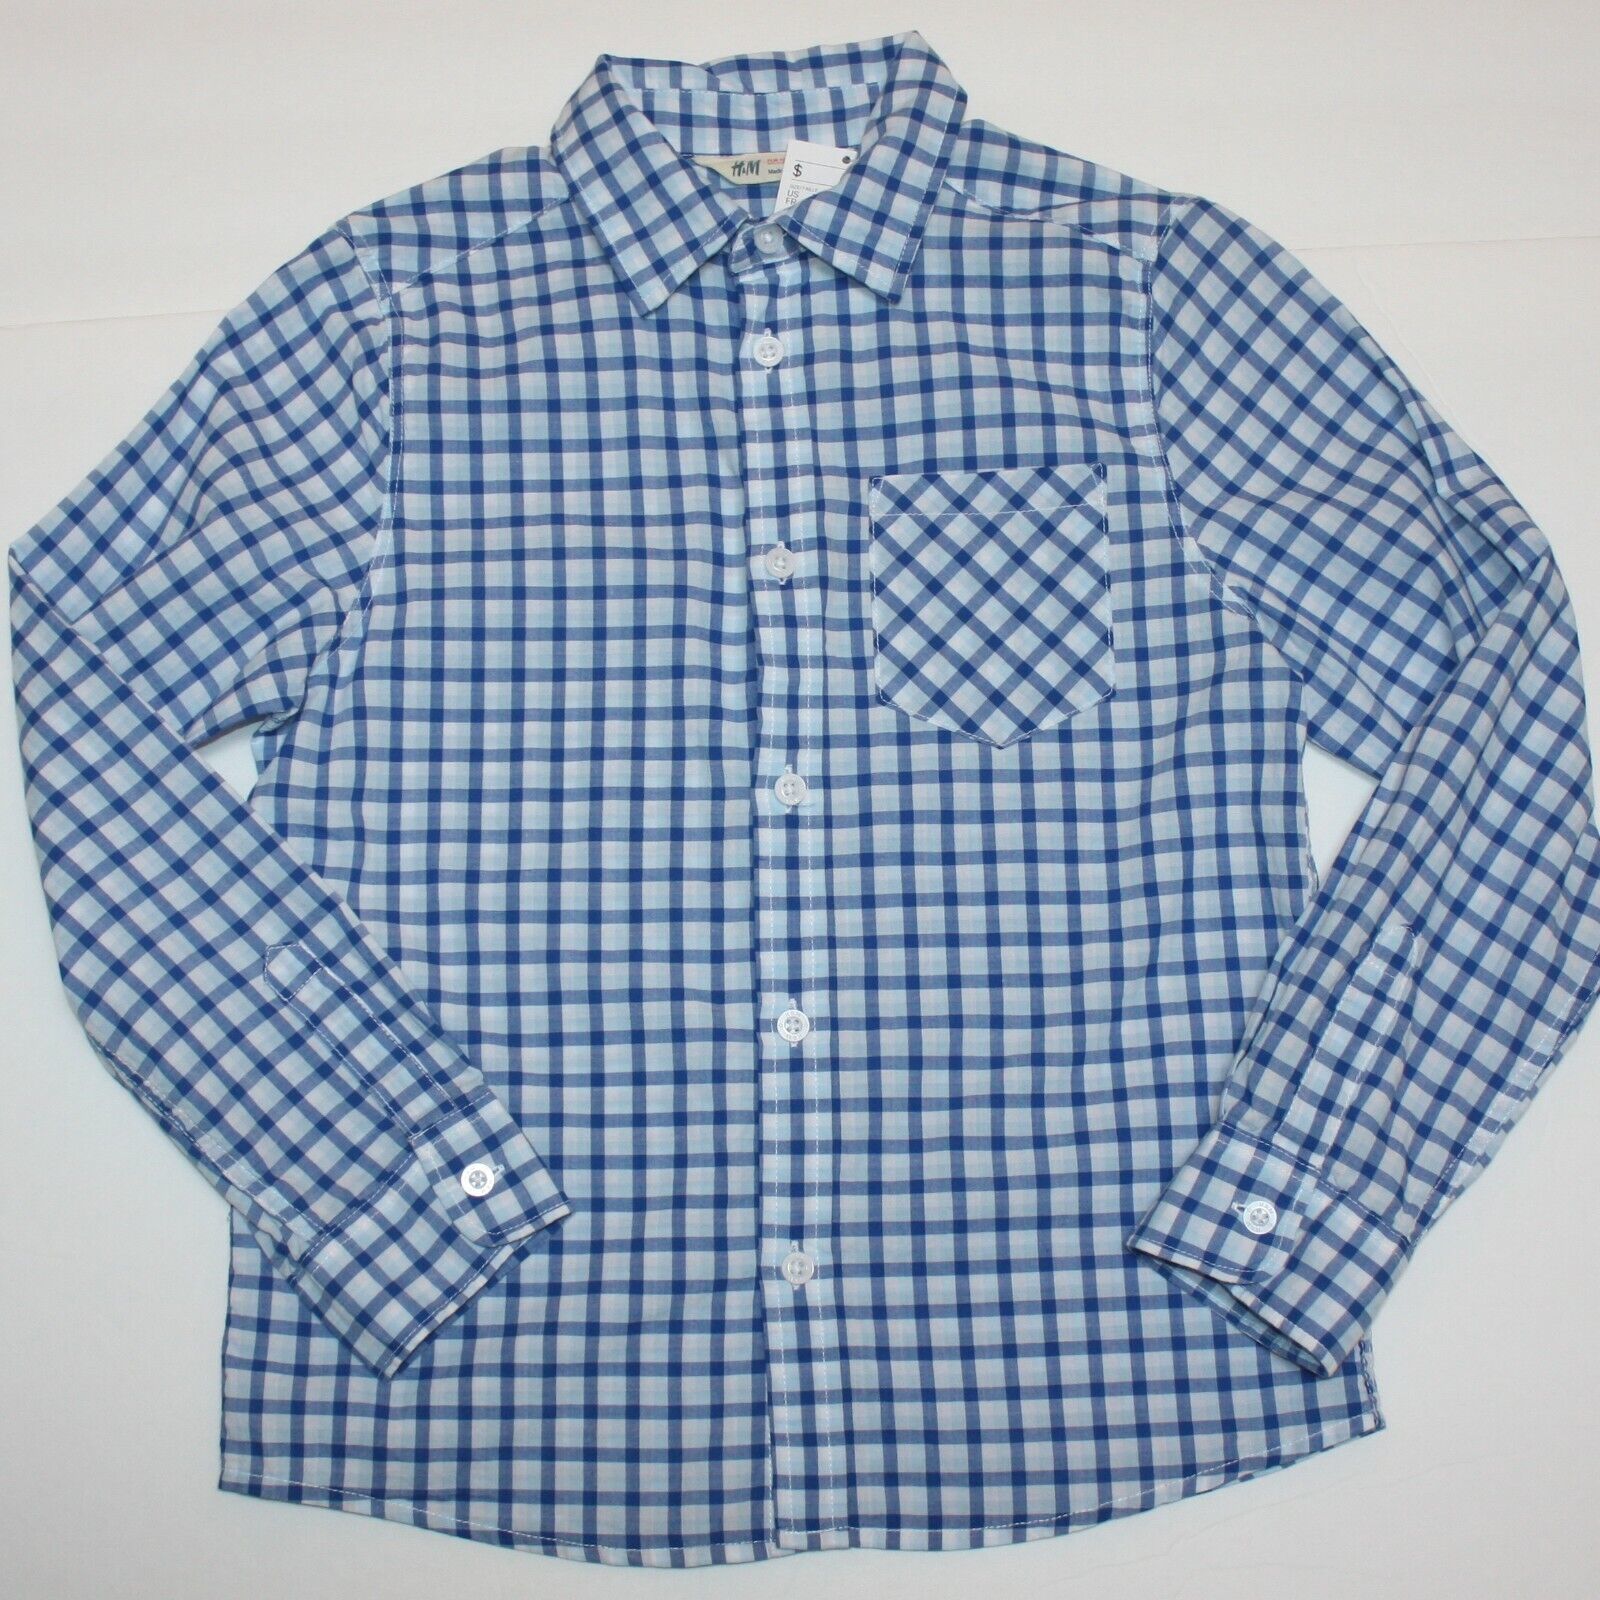 Primary image for H&M Boy's Blue Check Print Dress Shirt Top size 7 8 NWT